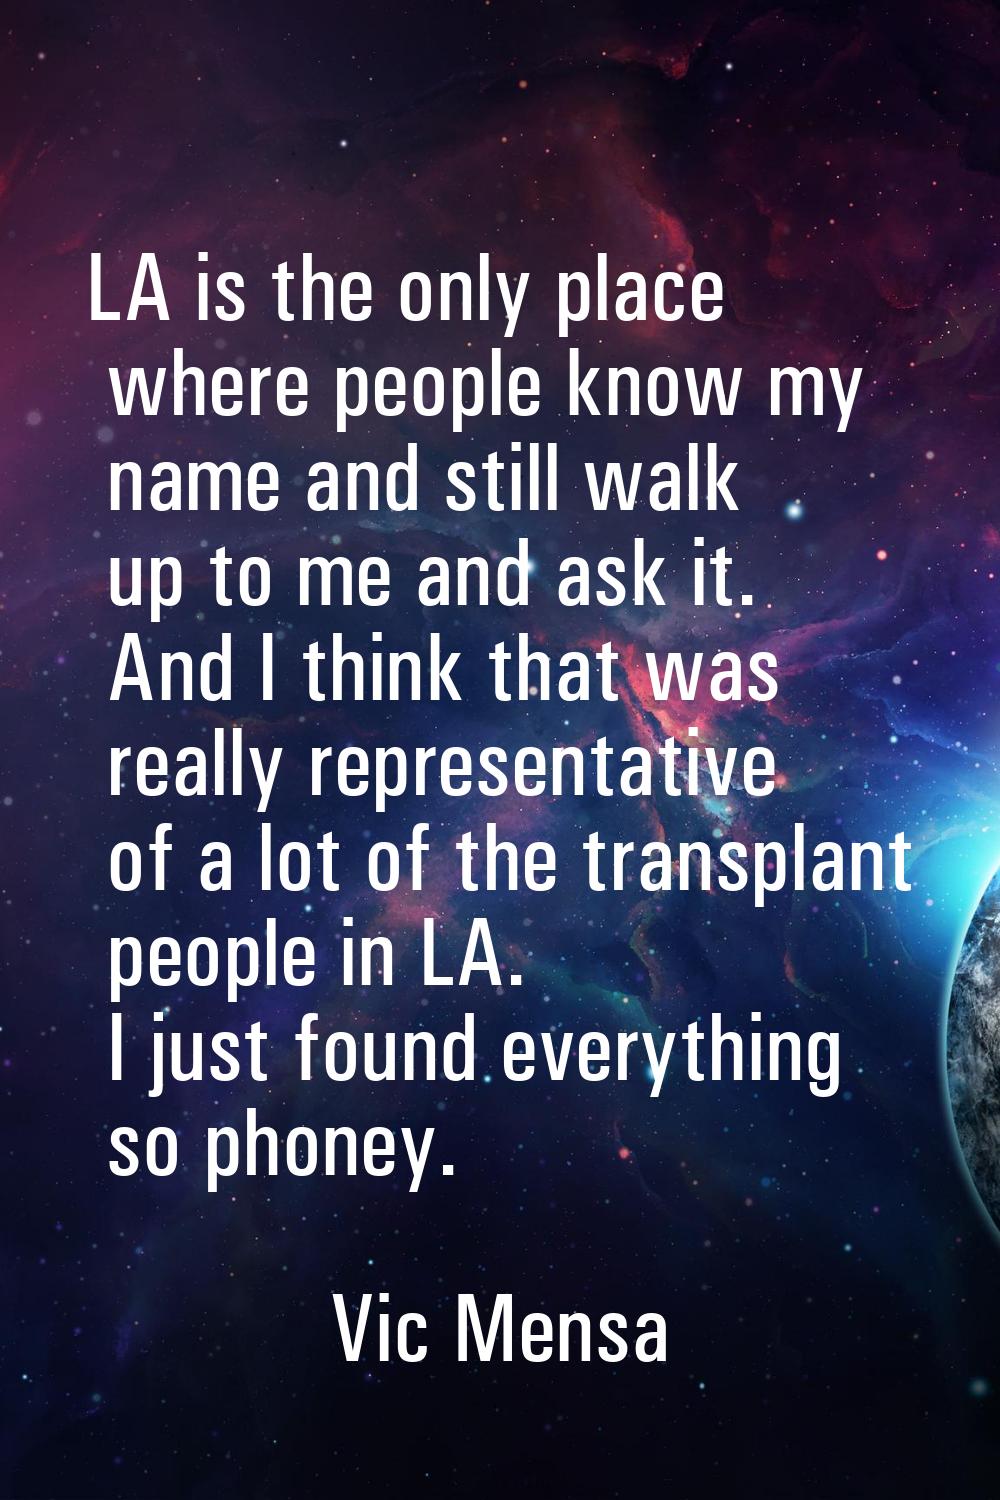 LA is the only place where people know my name and still walk up to me and ask it. And I think that